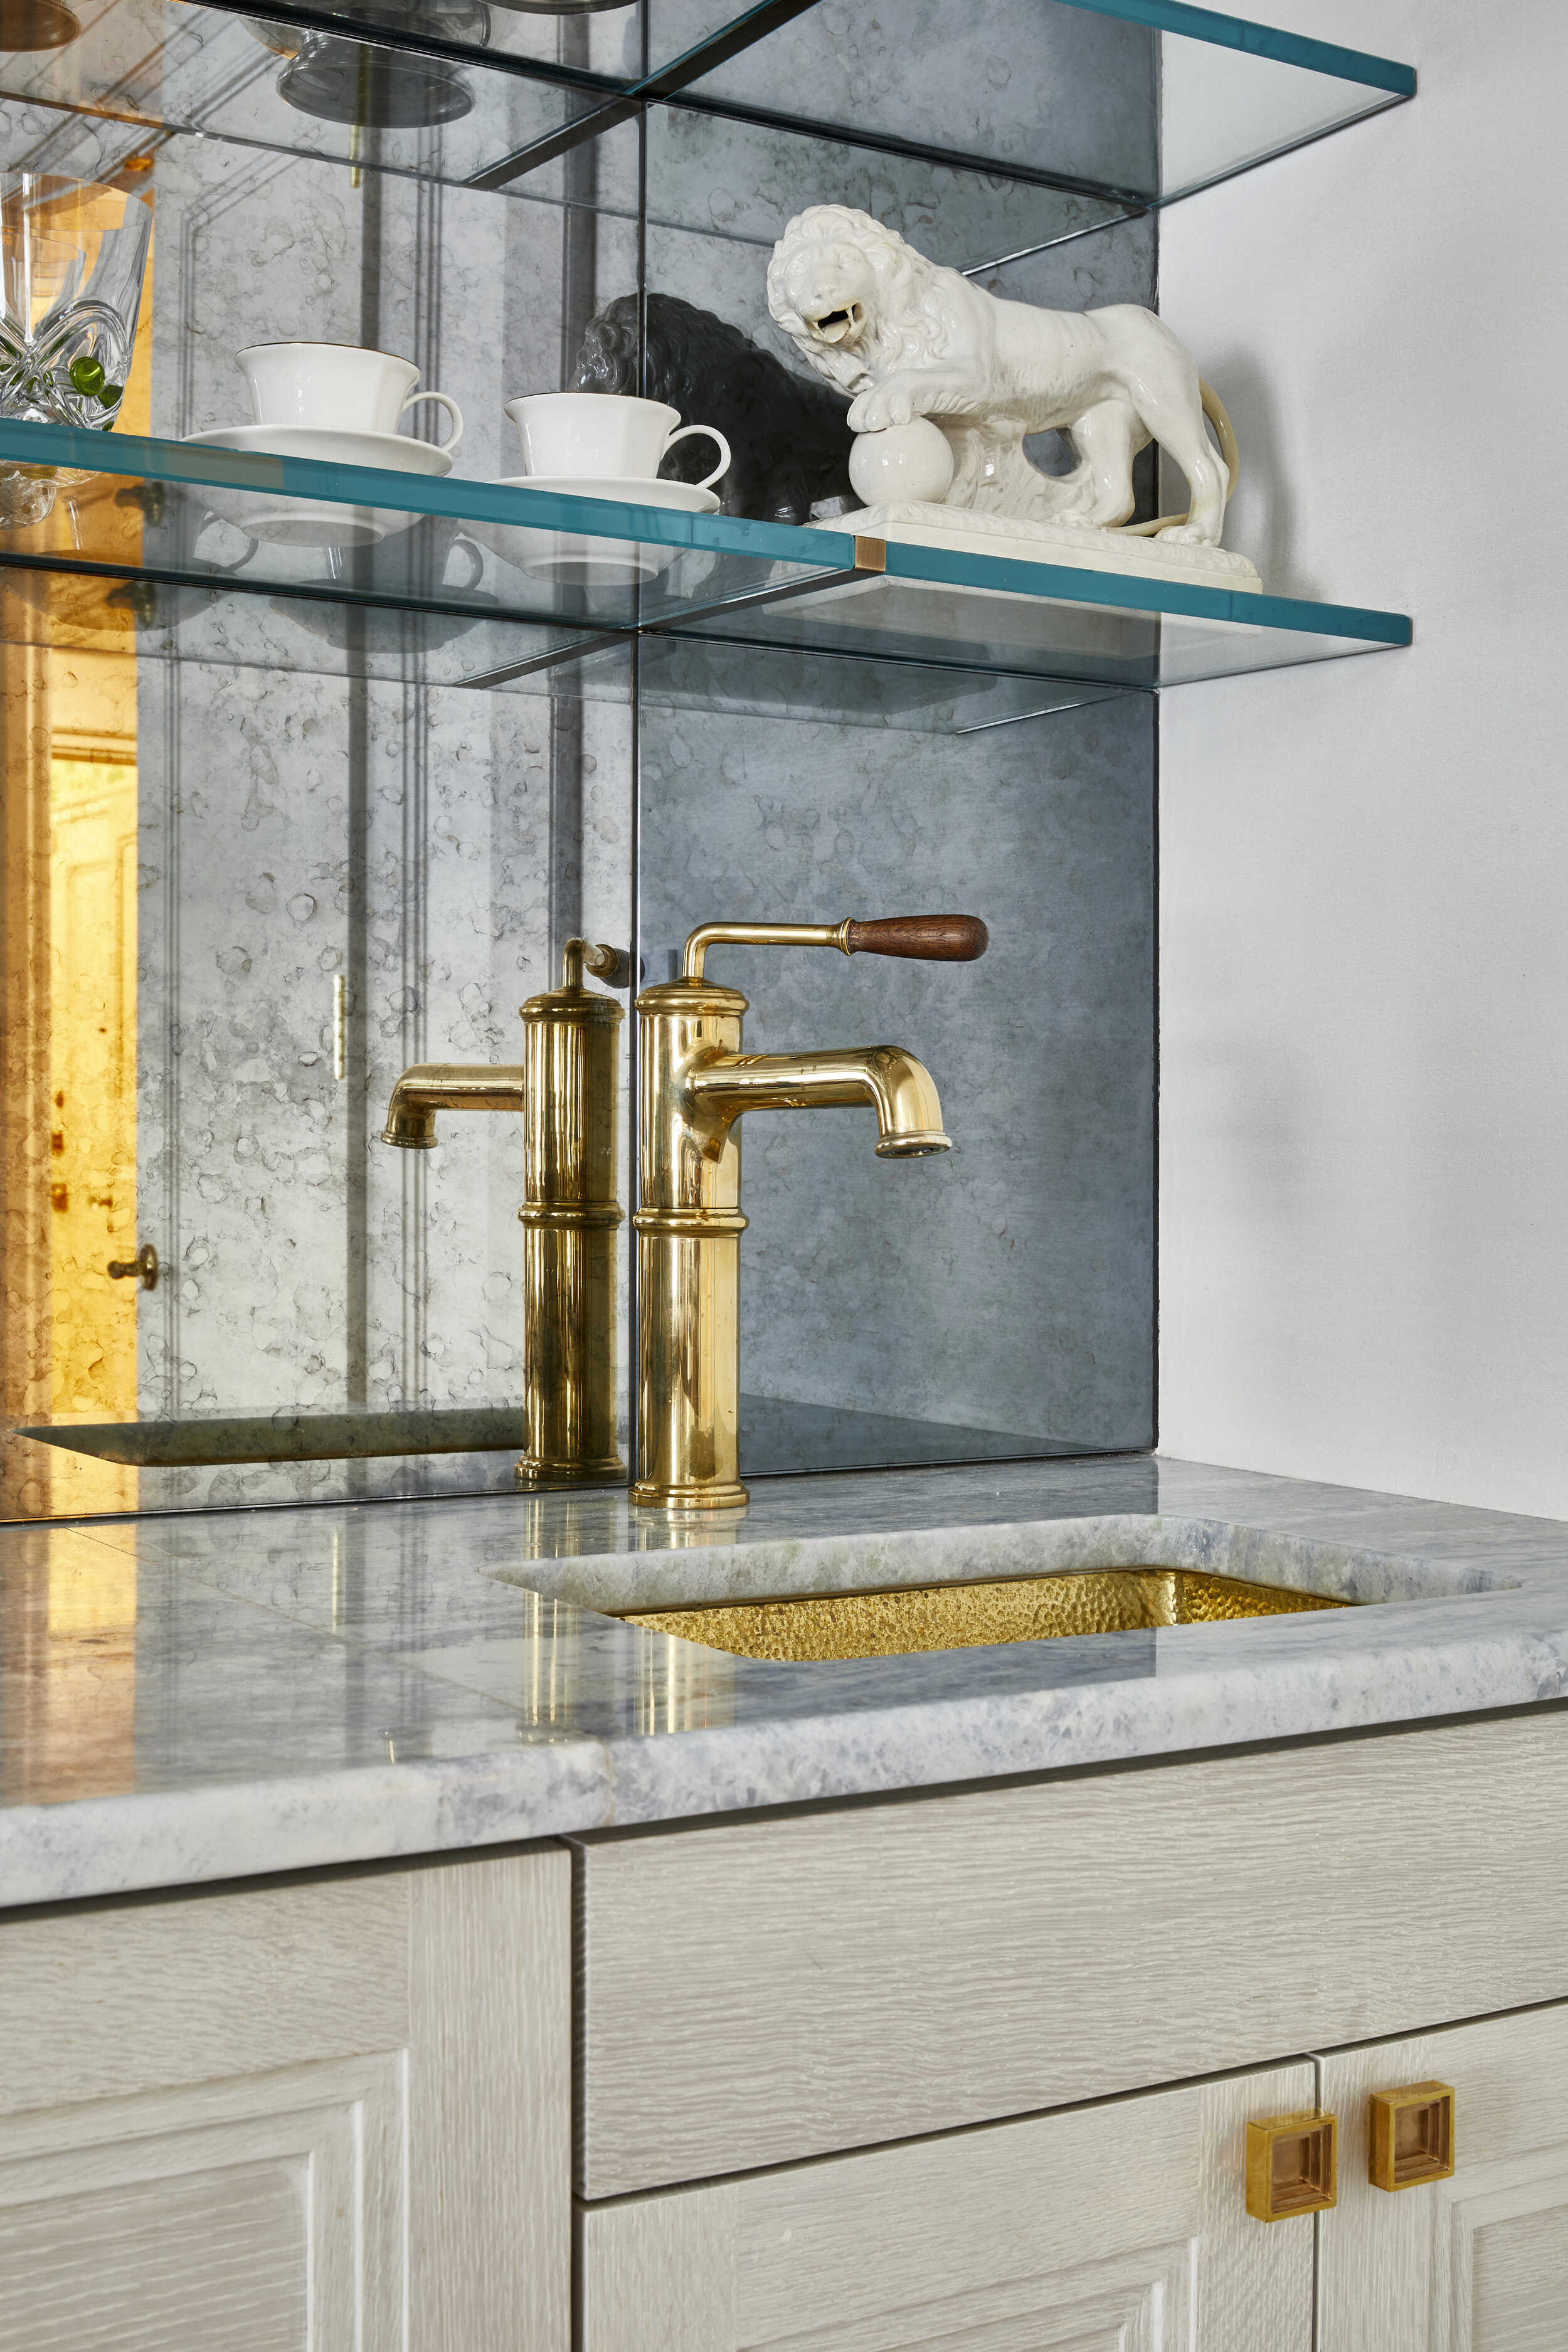 Custom millwork, mirrored wall, and floating glass shelves by Leone Construction Canteen bar faucet by Waterworks Hammered brass bar sink by Alno Inc